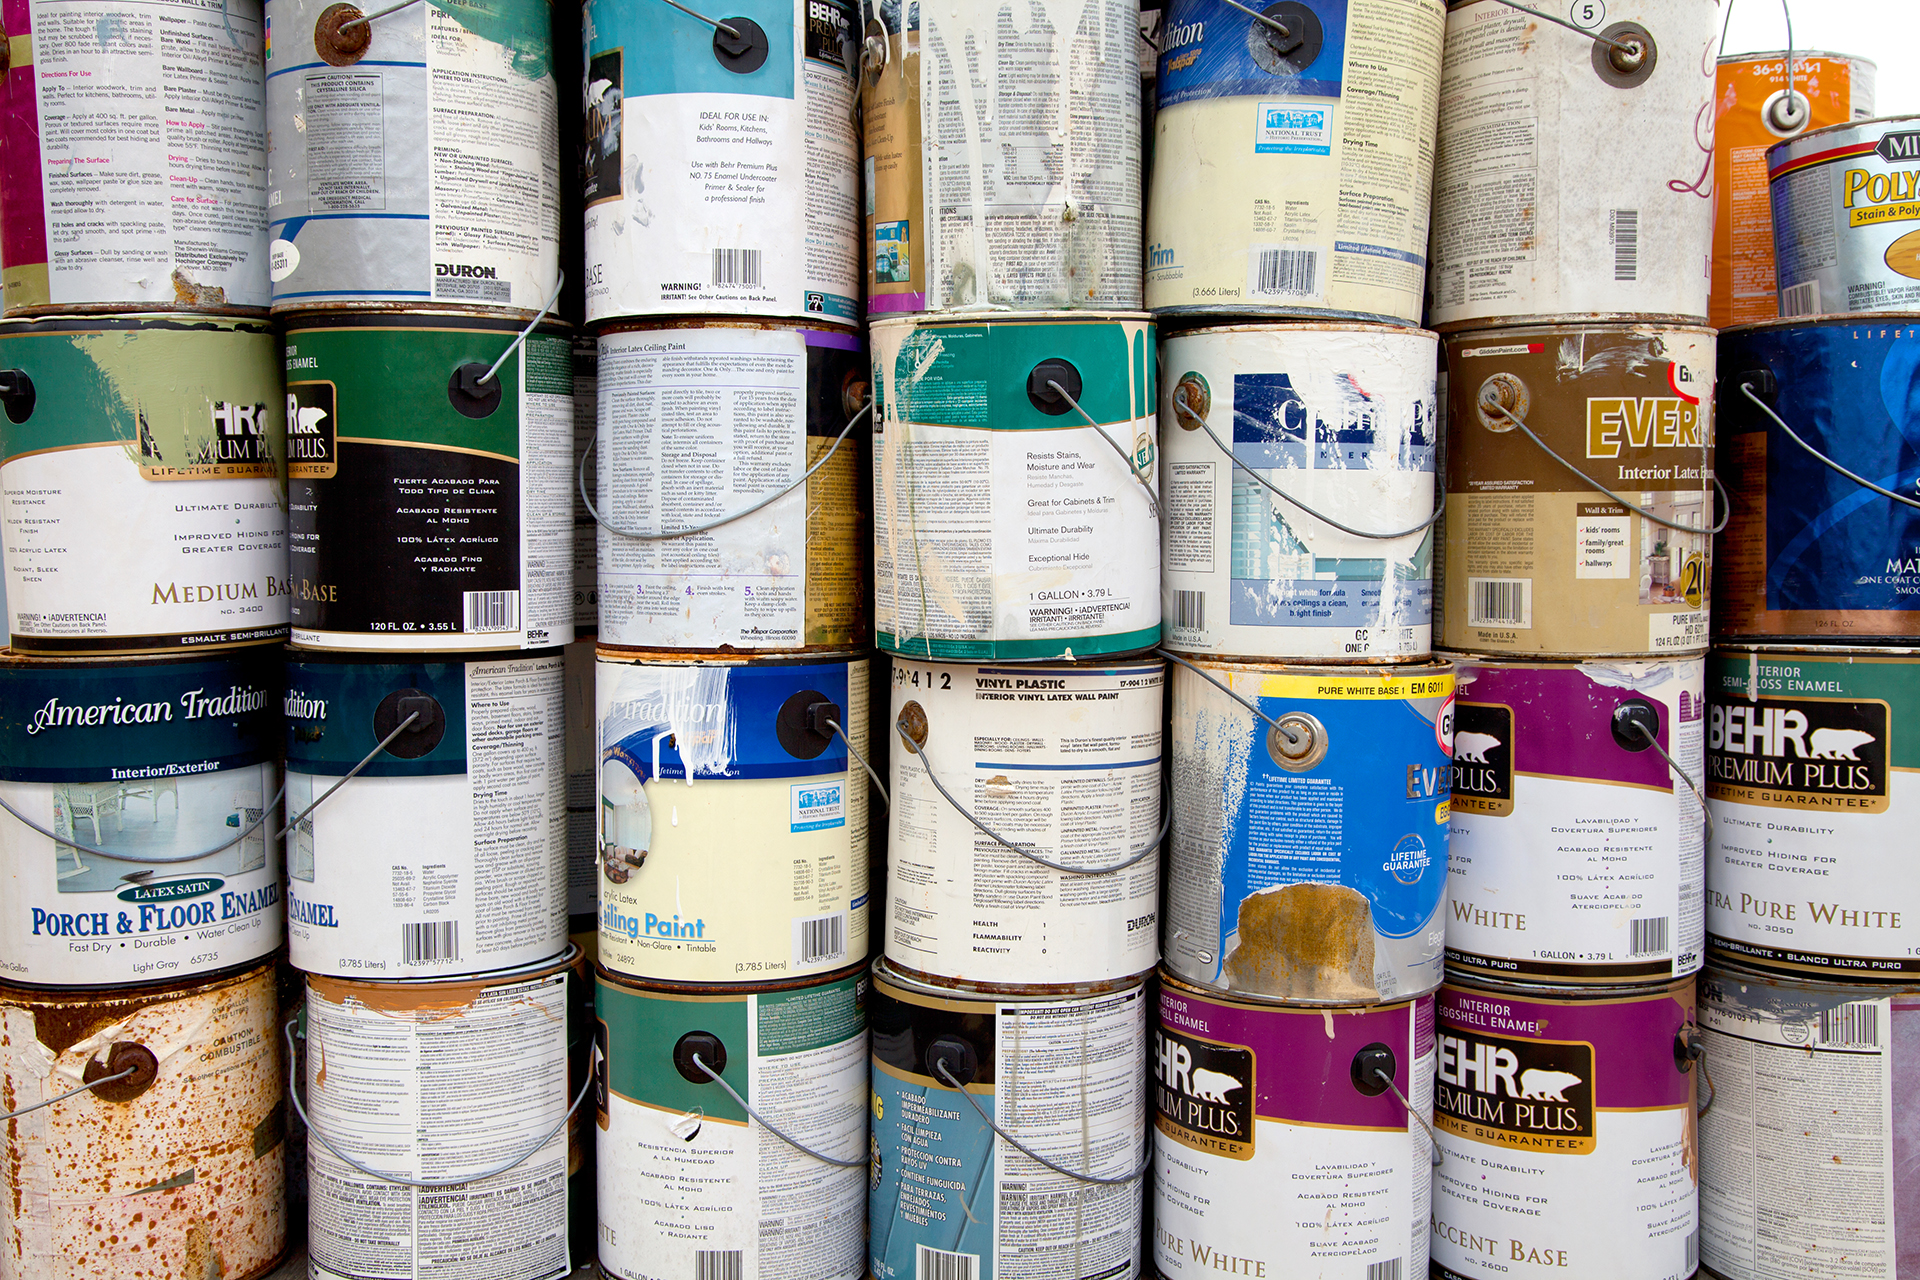 Latex paint cans stacked in a pile. The paint will be separated, processed for recycling.